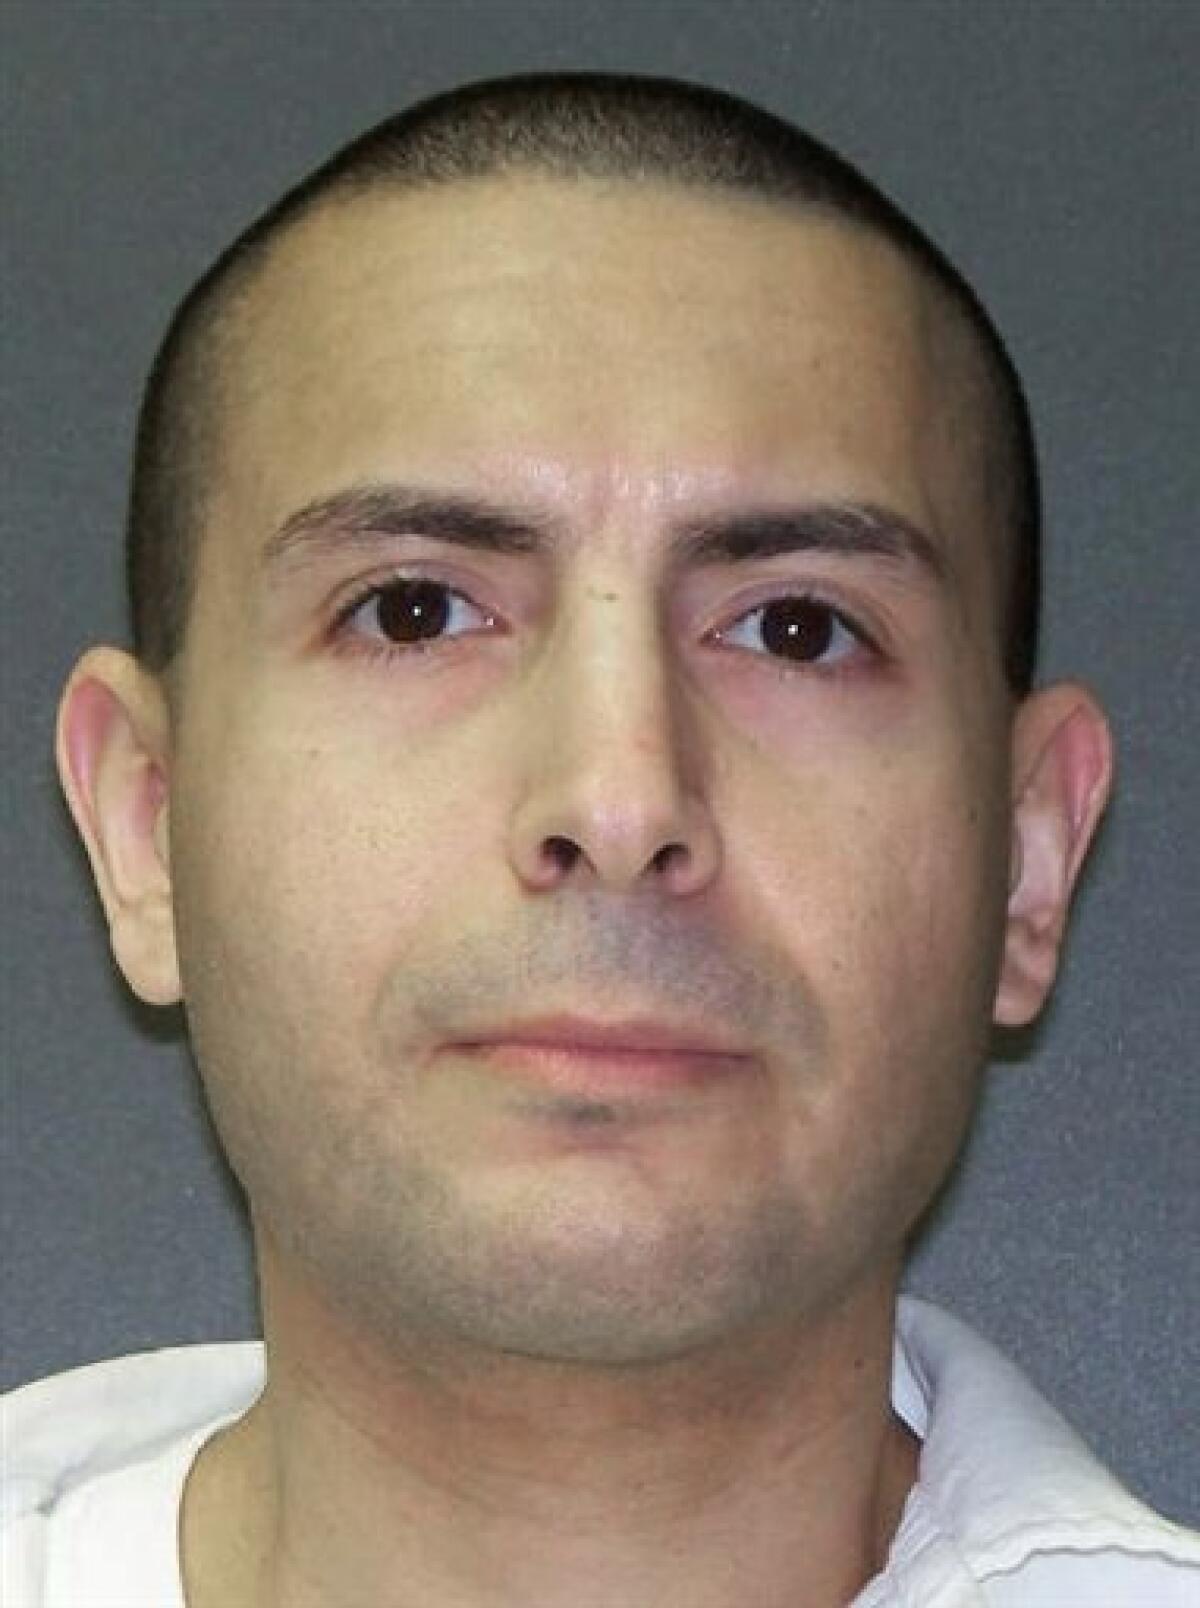 This undated handout photo released by the Texas Department of Criminal Justice shows death row inmate James Edward Martinez who was executed at the Texas prison in Huntsville, Tuesday, March 10, 2009. Martinez, 34, was convicted of a double slaying on Sept. 21, 2000, of his former girlfriend and her male friend outside a Fort Worth apartment complex. Sandra Walton, 29, was shot at least nine times. Michael Humphreys, 19, was hit eight times. (AP Photo/Texas Department of Criminal Justice)